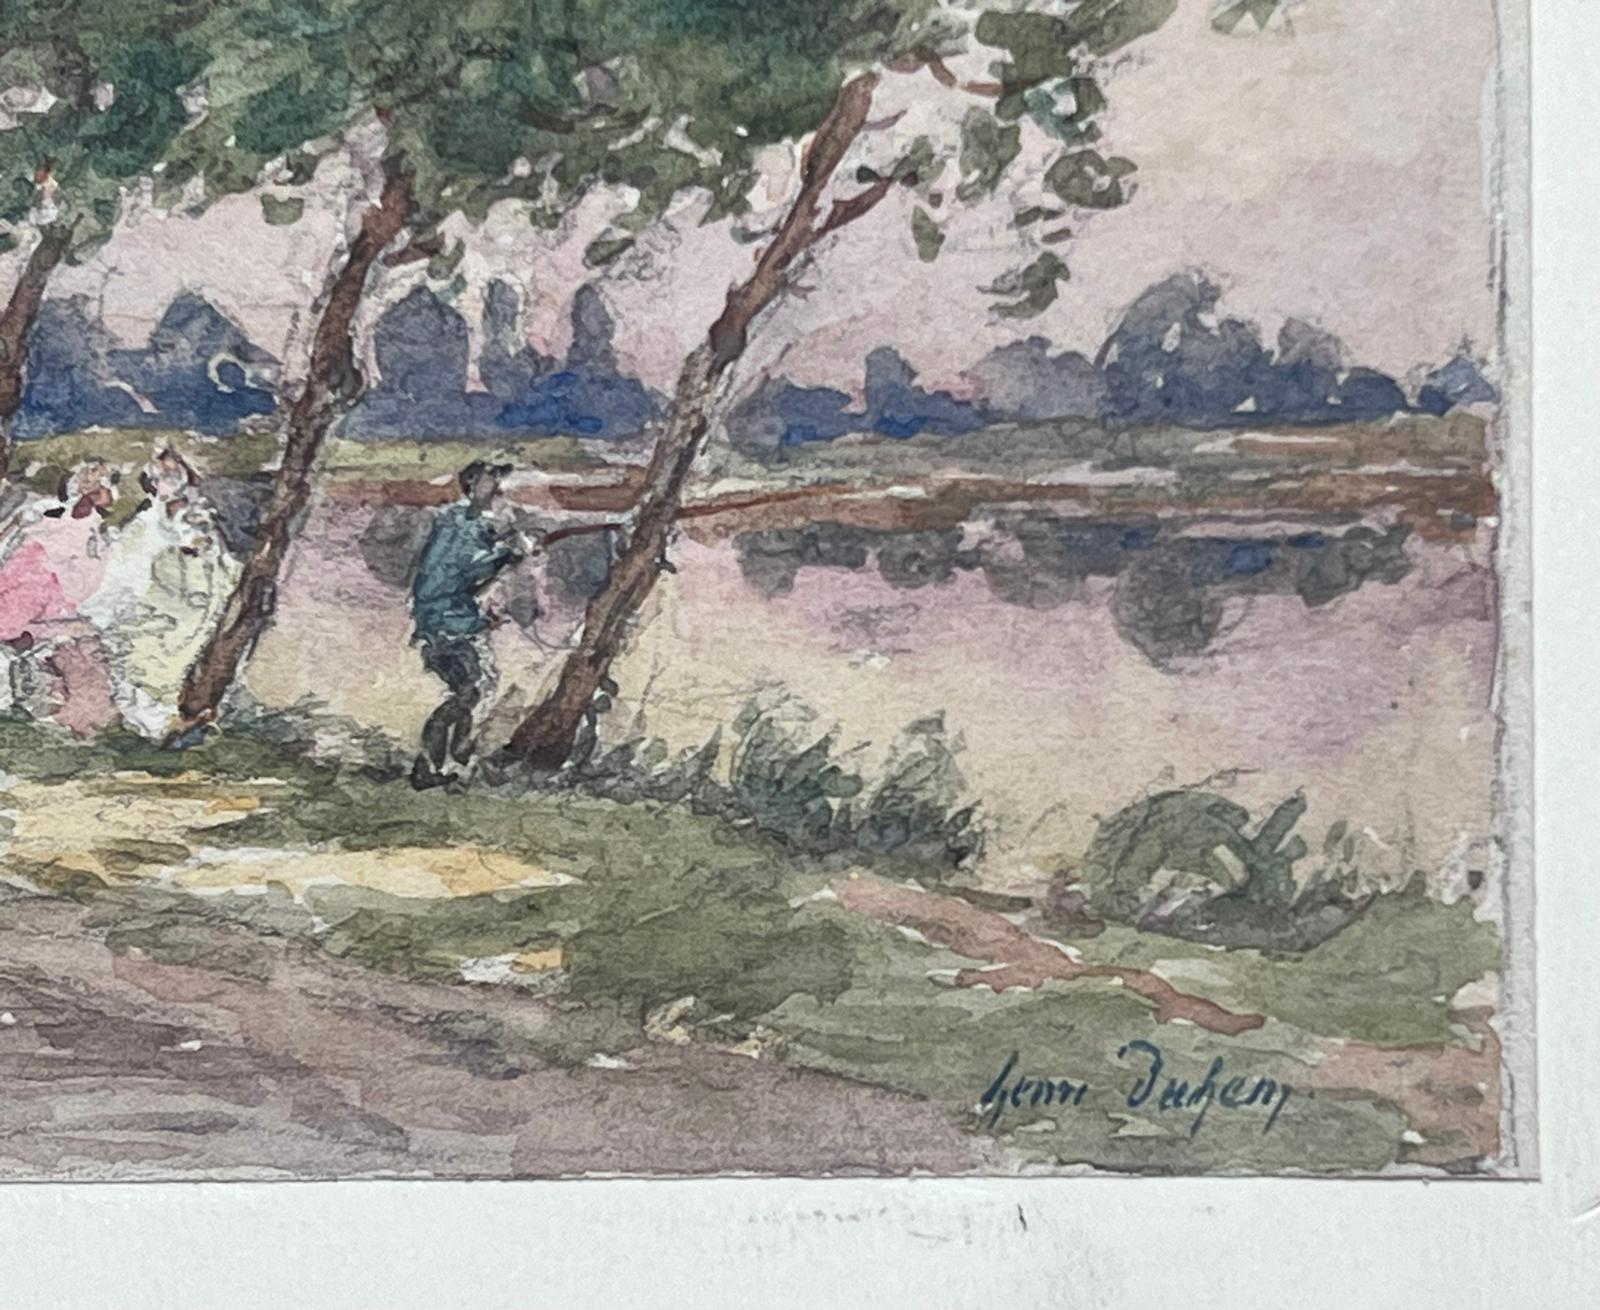 The artist: 
Henri Aime Duhem (1860-1941) French *see notes below, signed 

Title: Les Pecheurs

Medium:  
signed gouache on paper, loosely laid over card, unframed

card: 4.5 x 6 inches
painting: 3.25 x 4.5 inches

Provenance: 
private collection